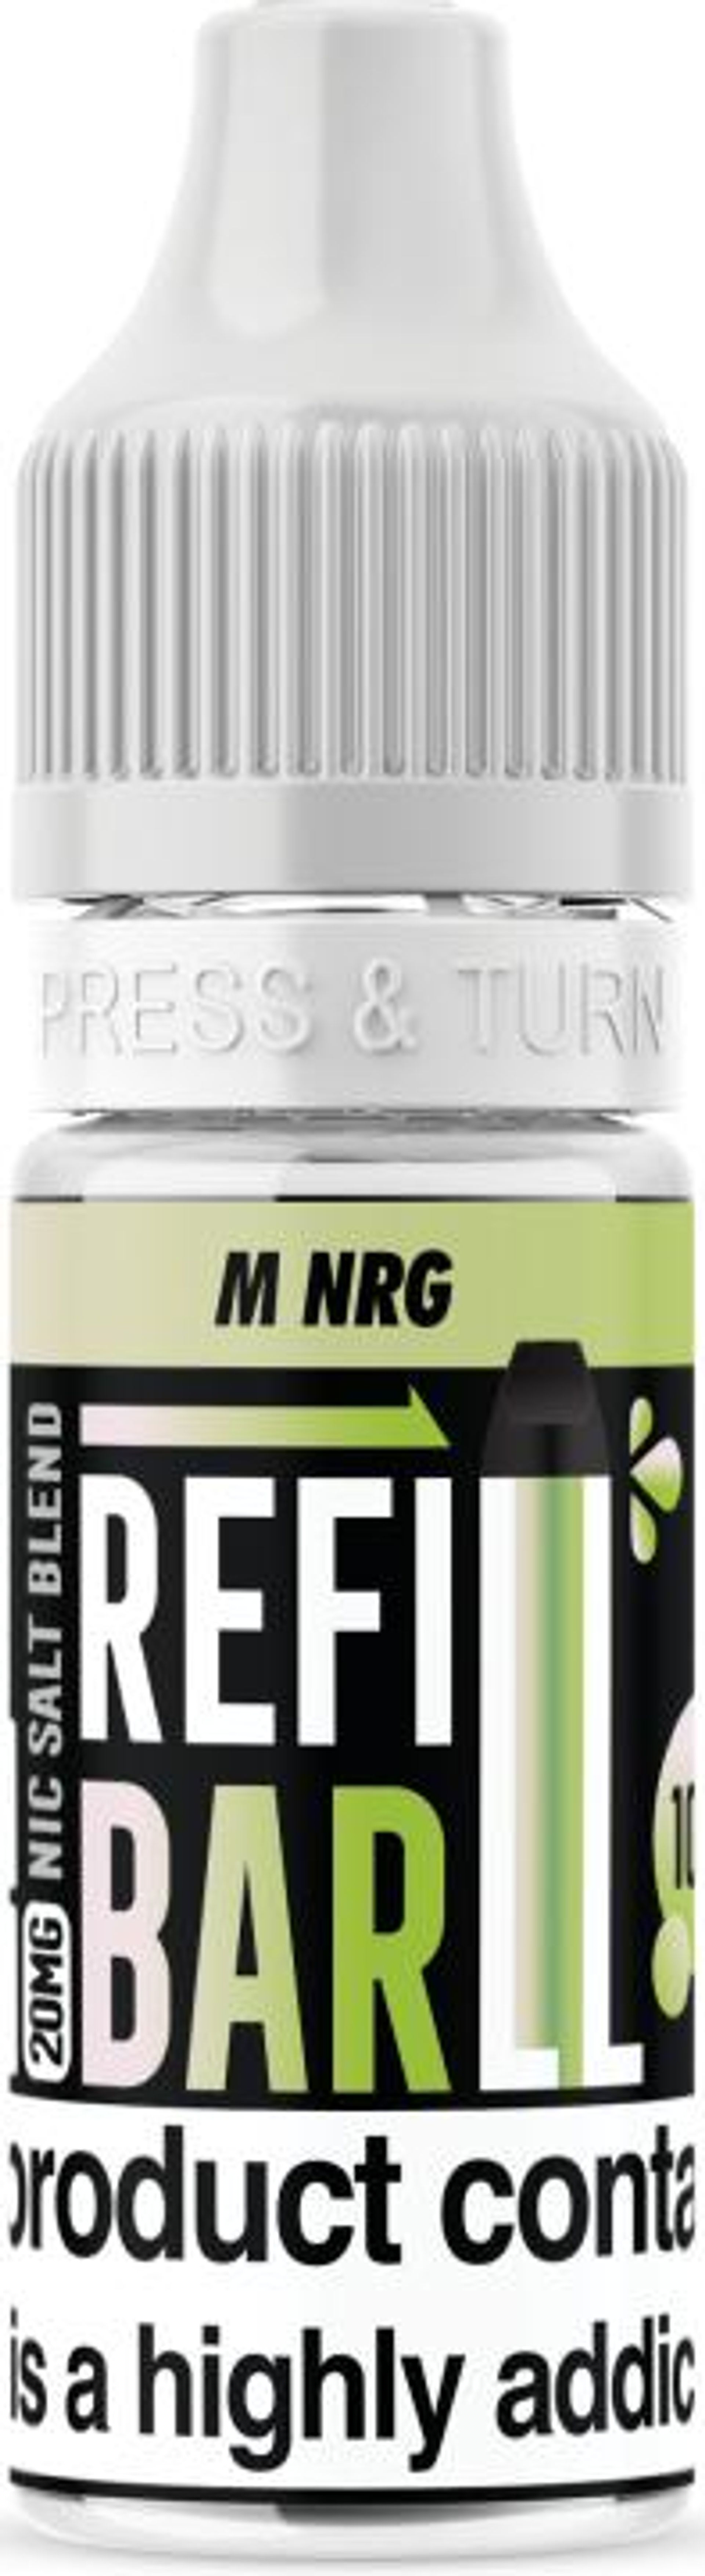 Image of M NRG by Refill Bar Salts